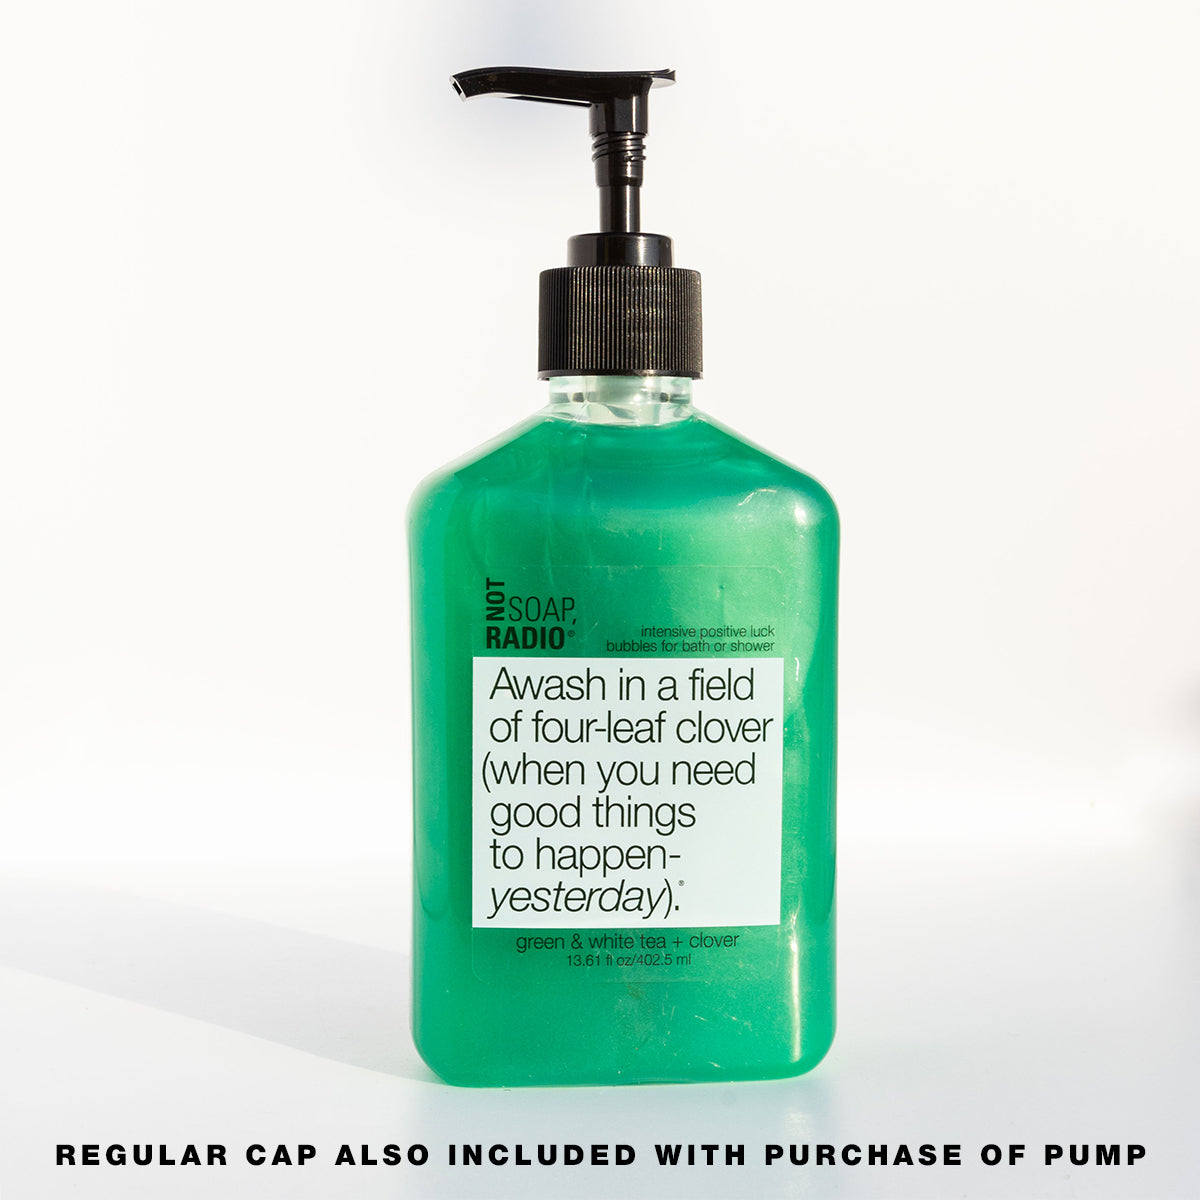 An intensive positive luck shower gel featuring a pump option for the bottle when you buy.